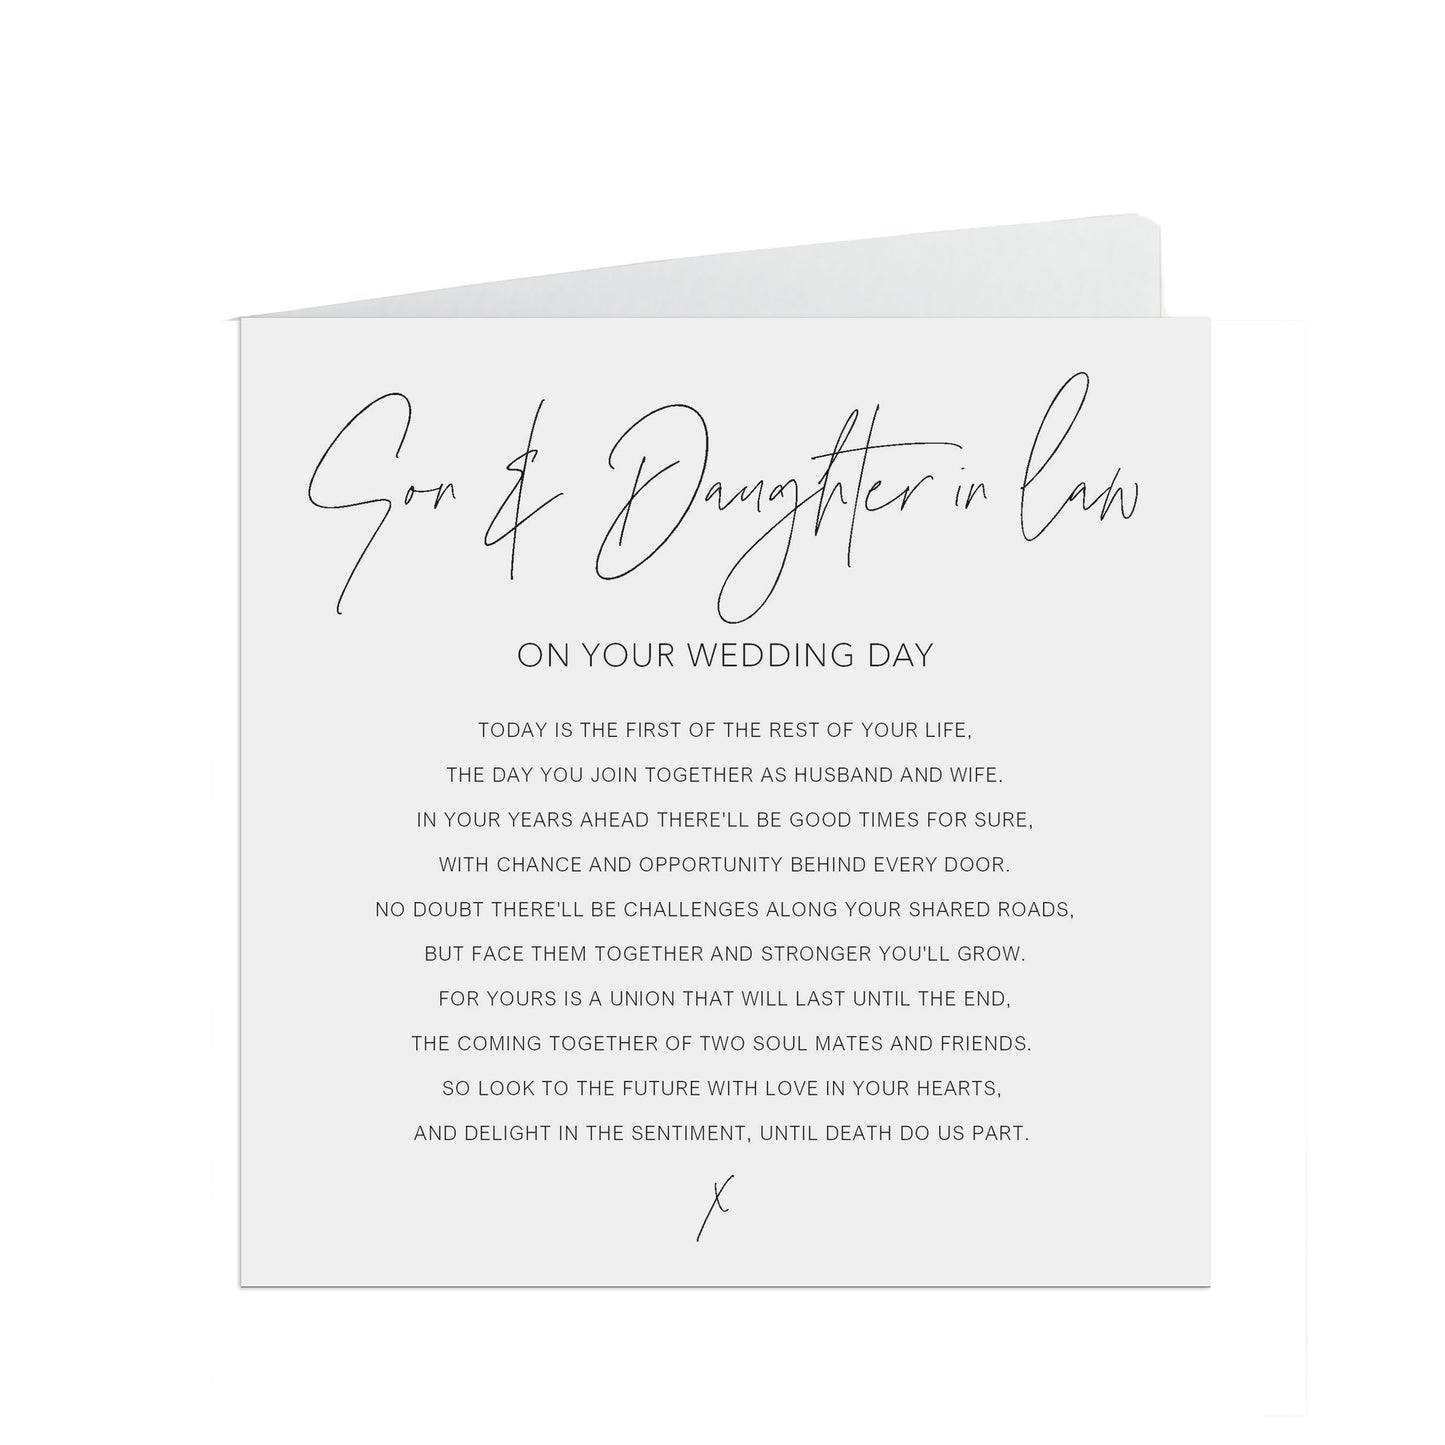 Son & Daughter In Law On Your Wedding Day Card, Black and White Minimalist 6x6 Inches In Size With A White Envelope